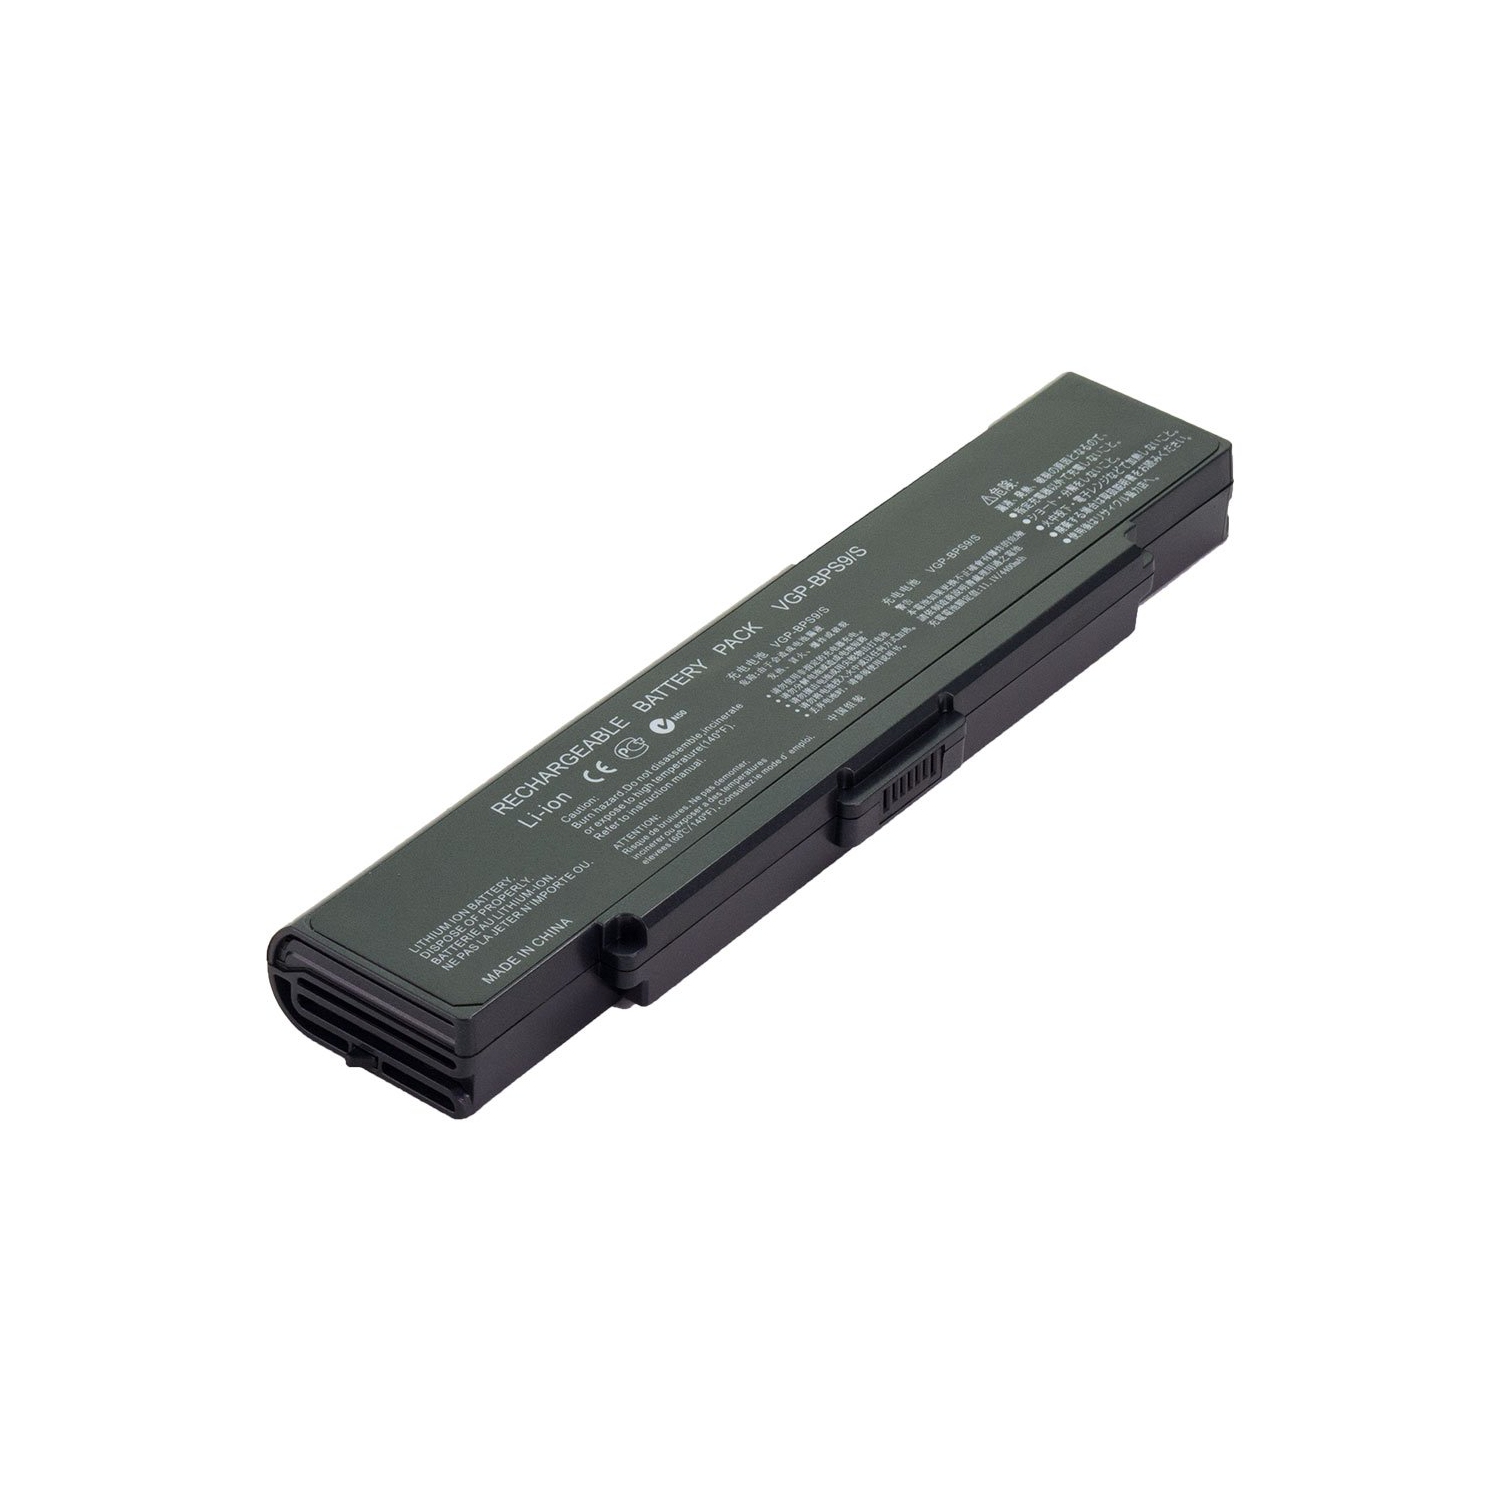 Laptop Battery Replacement for Sony VAIO VGN-CR410E/P, VGP-BPL9, VGP-BPS10/S, VGP-BPS10A/B, VGP-BPS9A, VGP-BPS9B